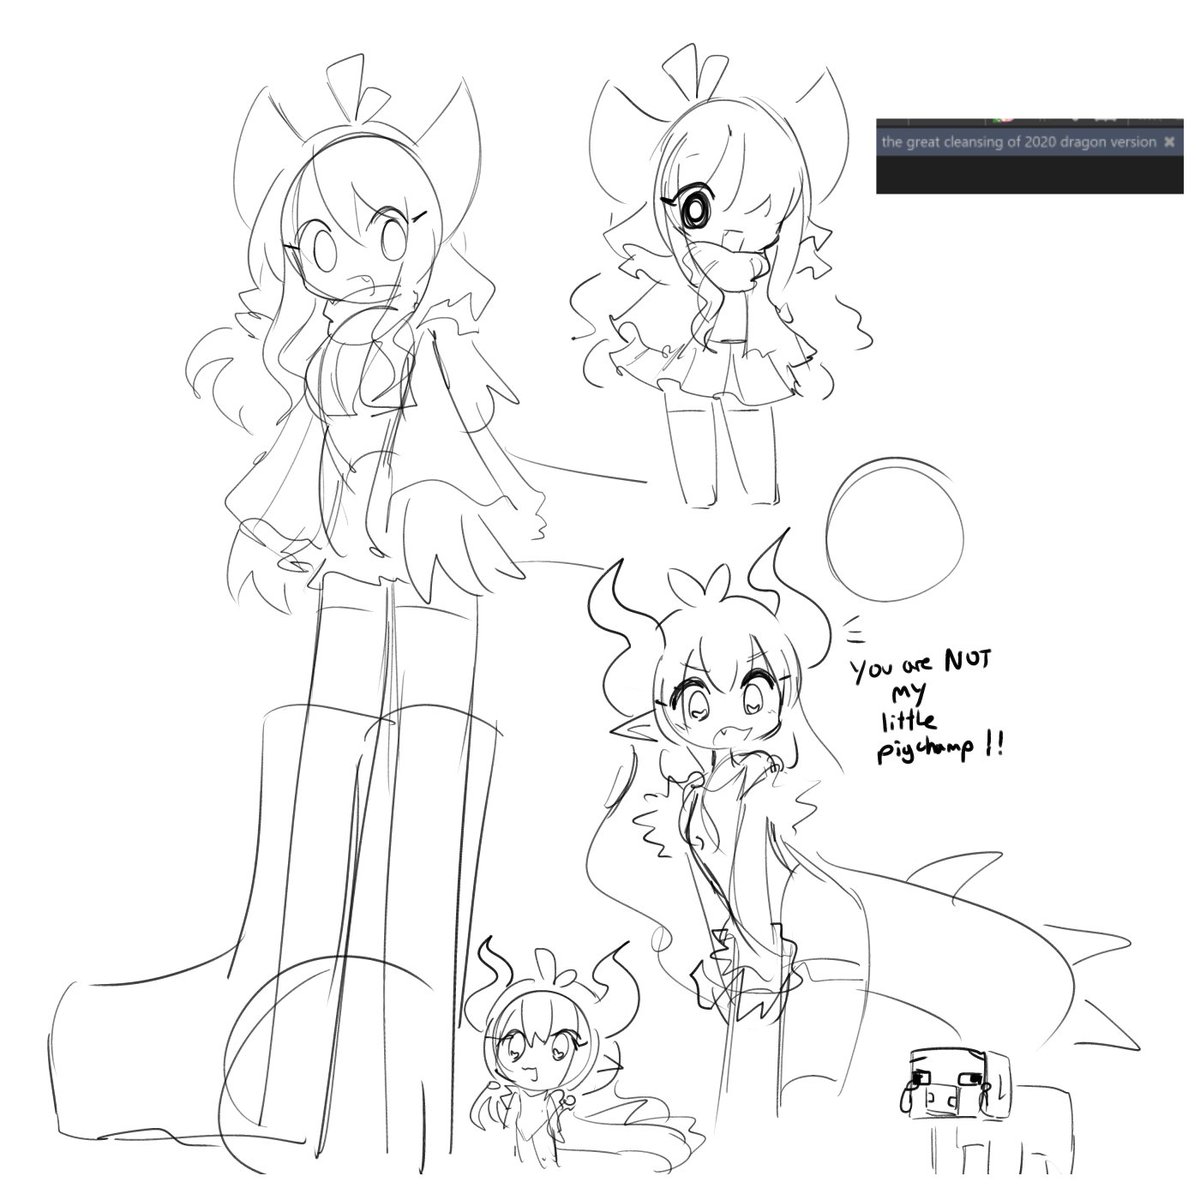 some of the stream sketches 